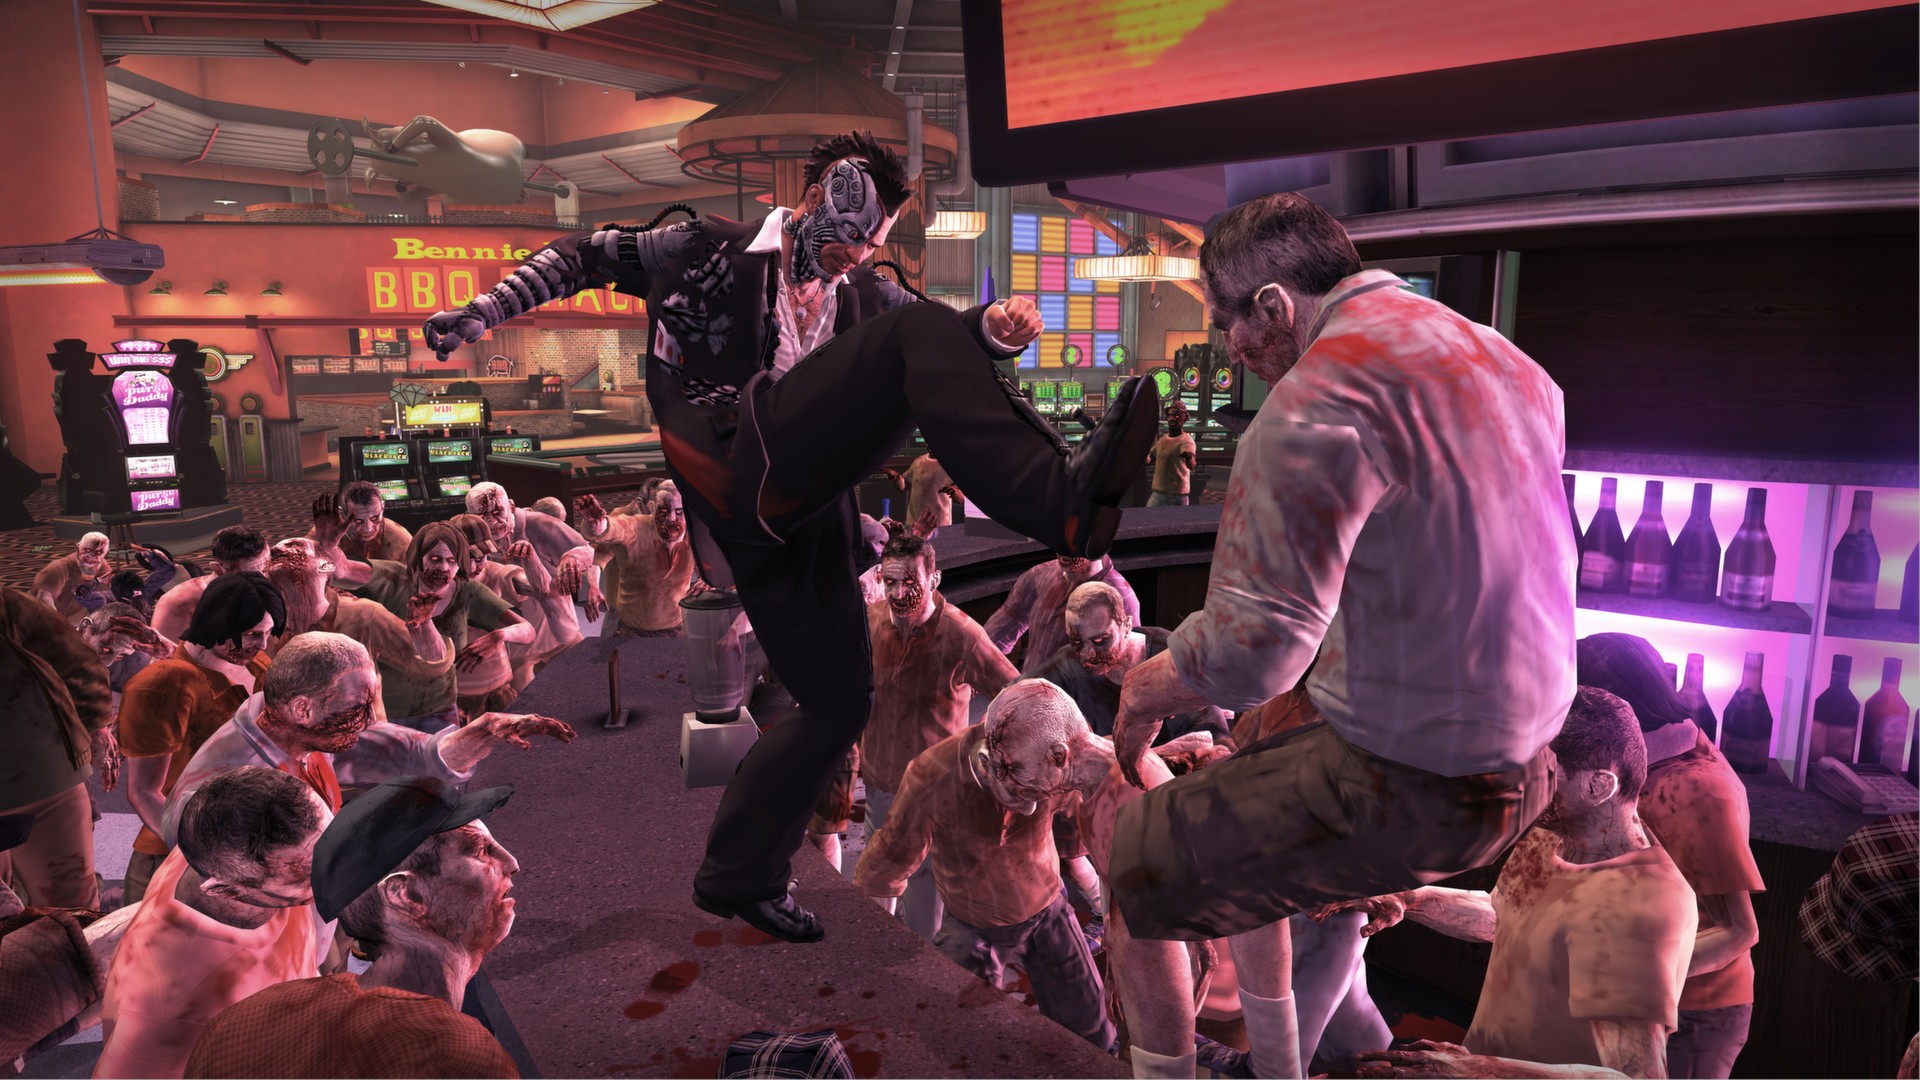 Buy Dead Rising 2 Off The Record Steam